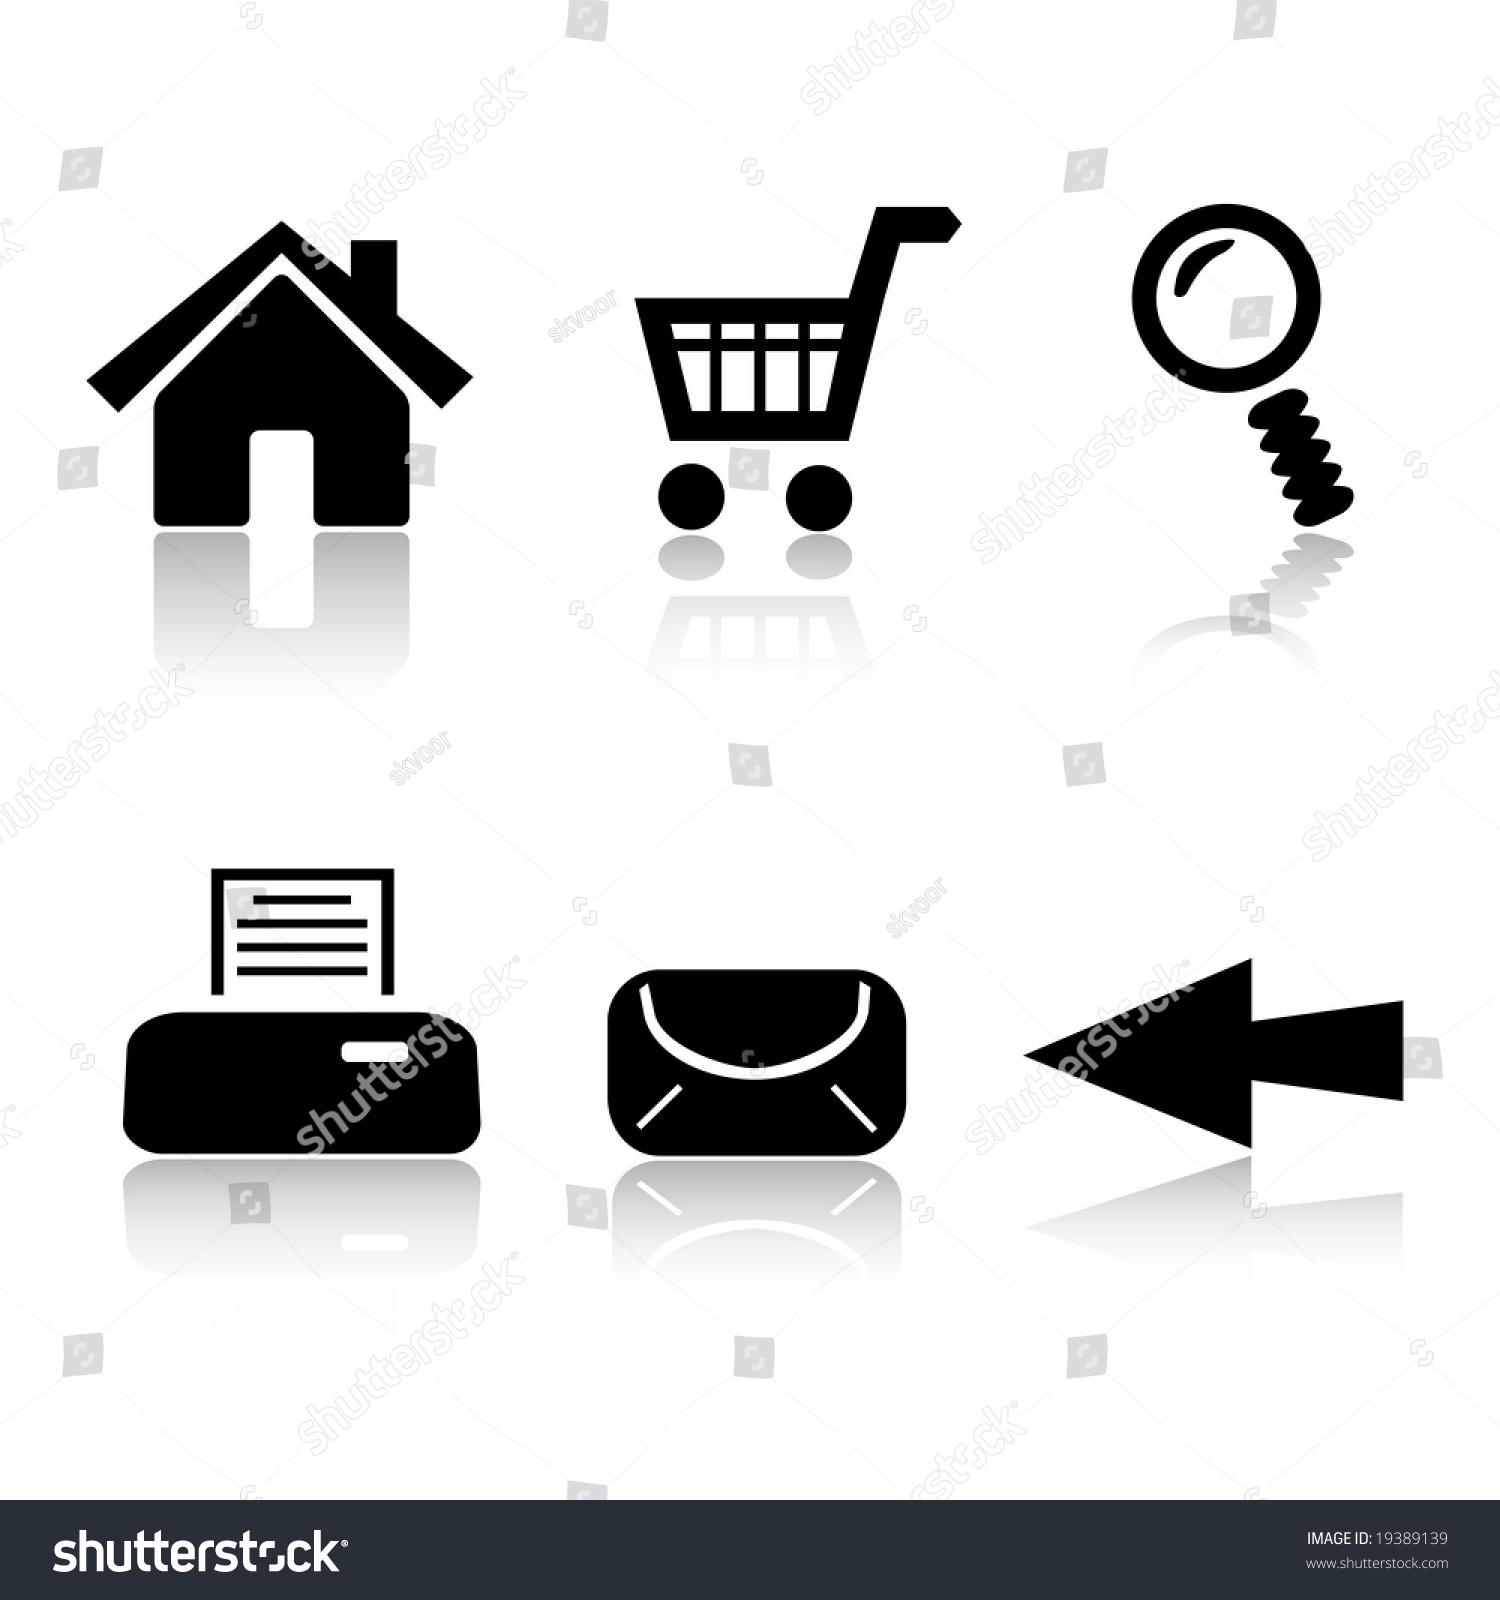 Set Of 6 Black And White Icons Stock Vector Illustration 19389139